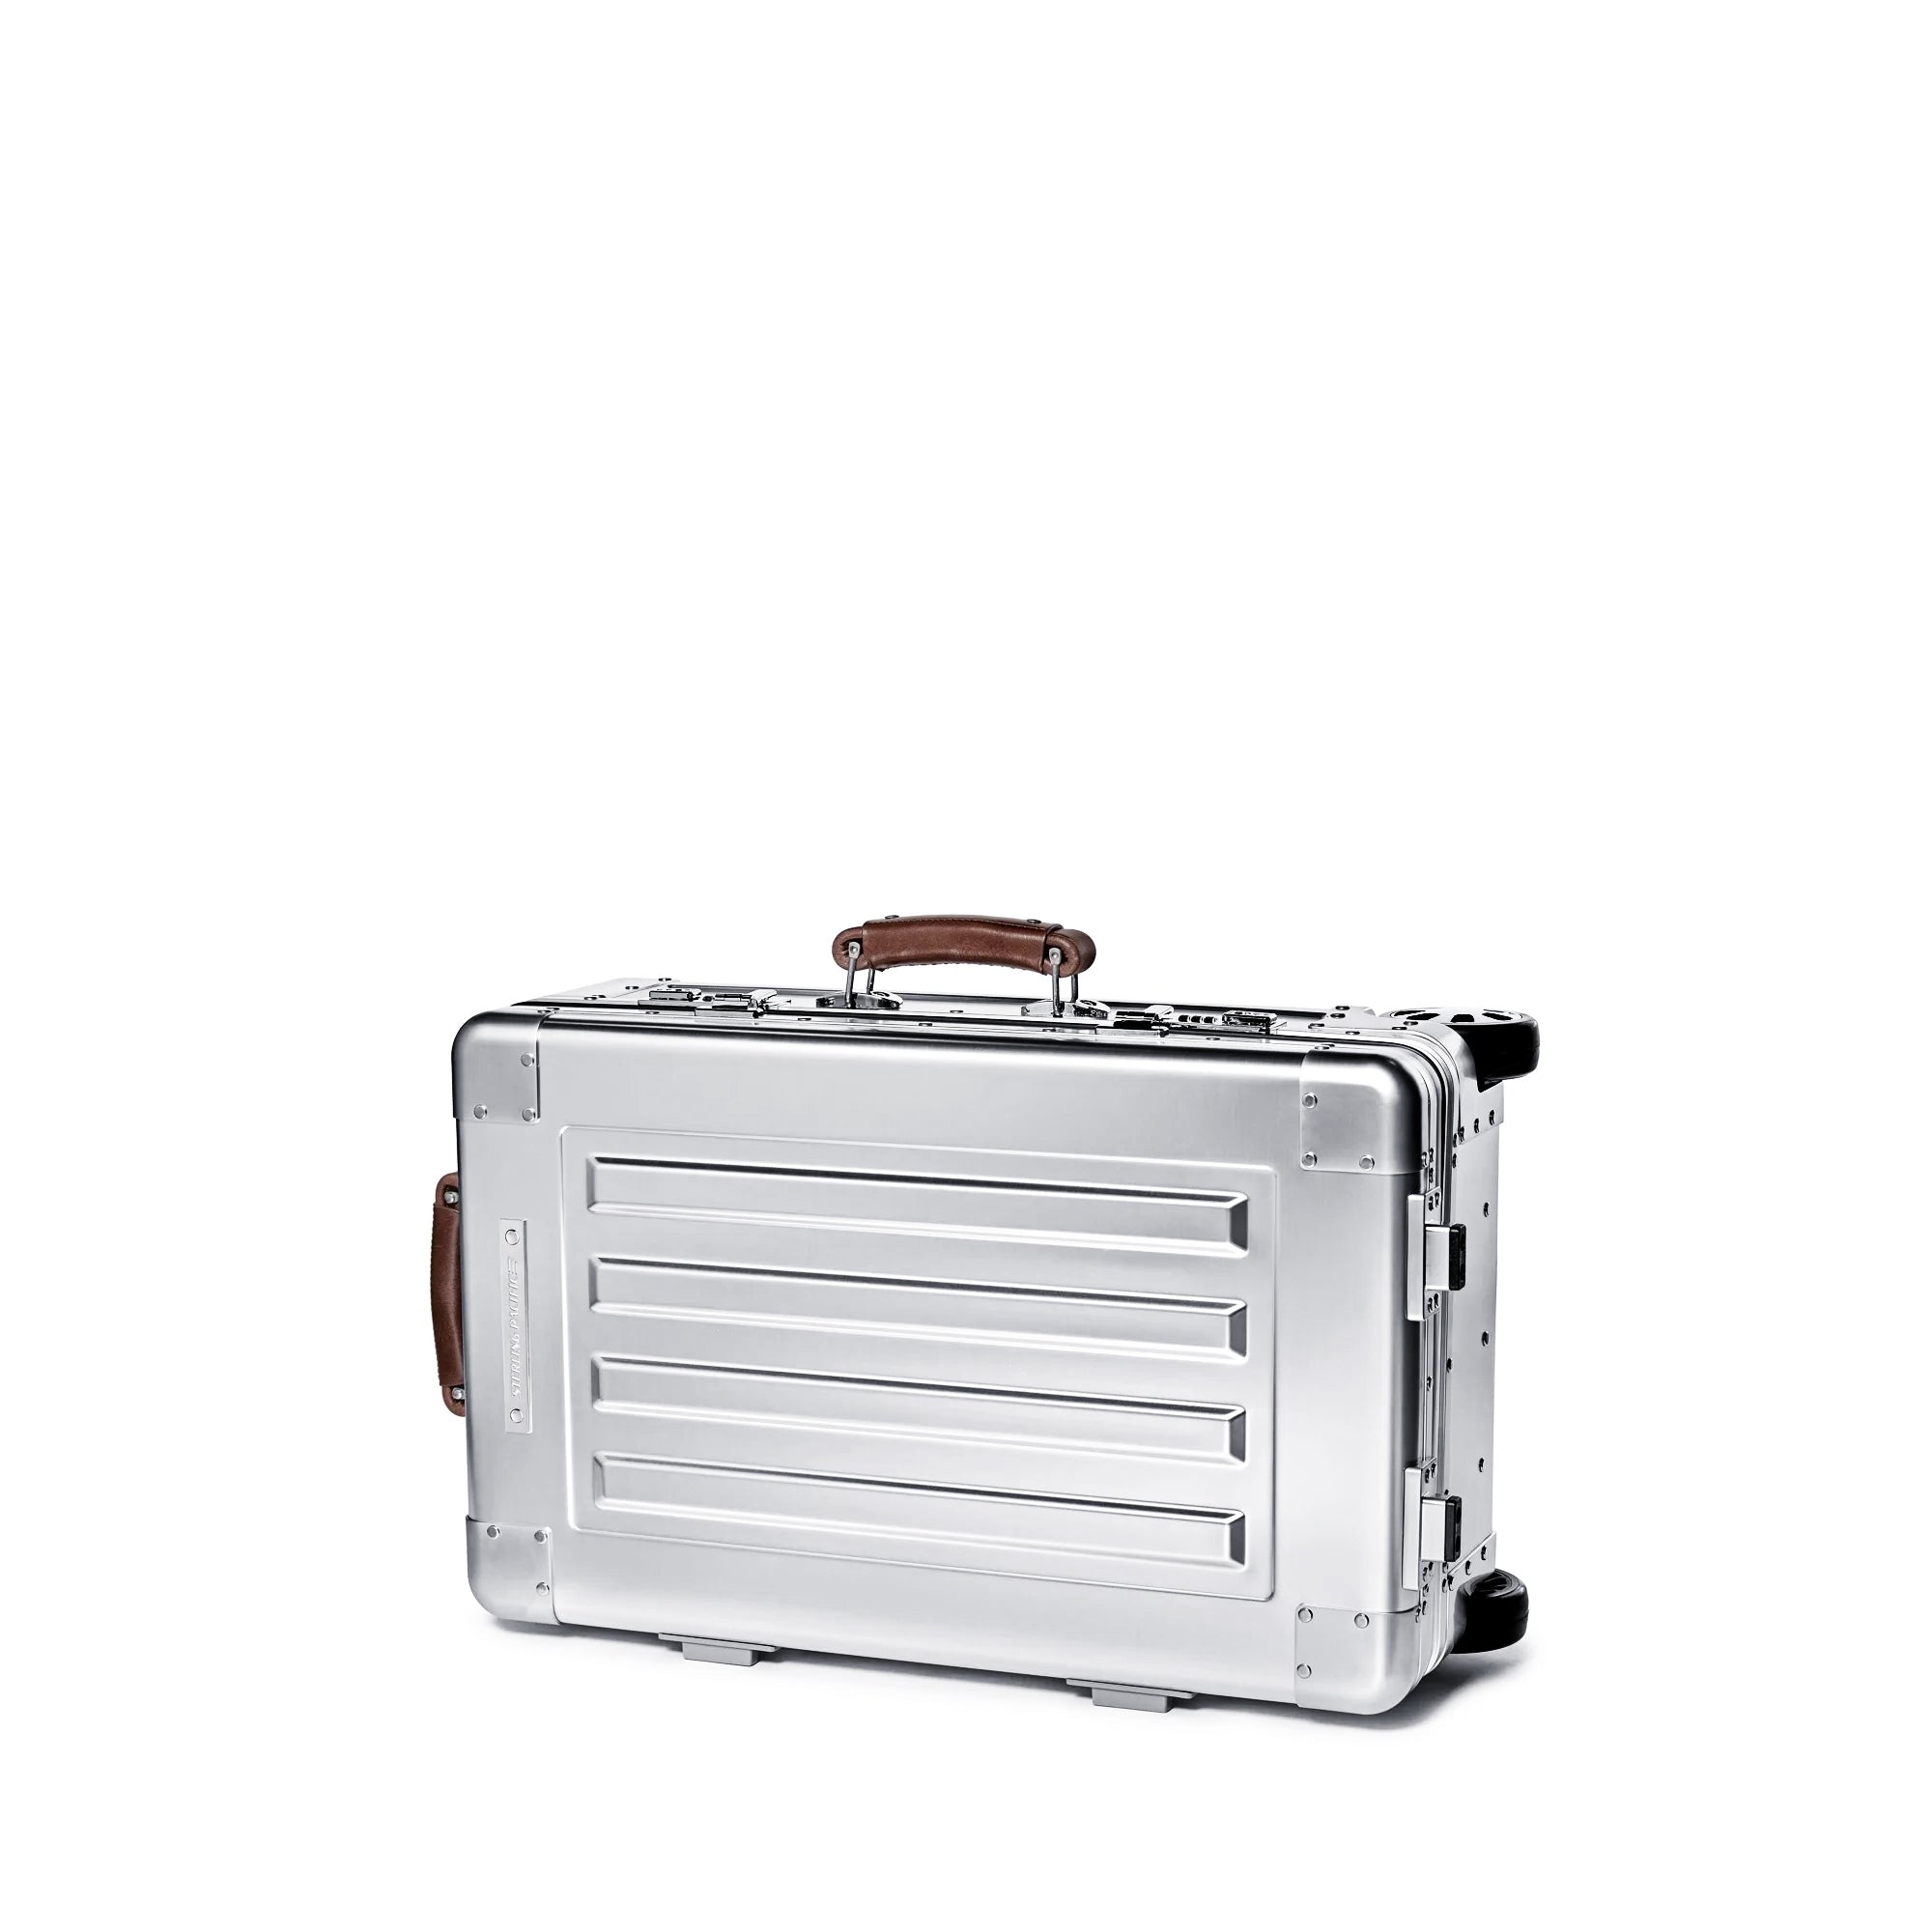 Sterling Pacific Luggage – 35L Cabin Travel Case (Carry-On)